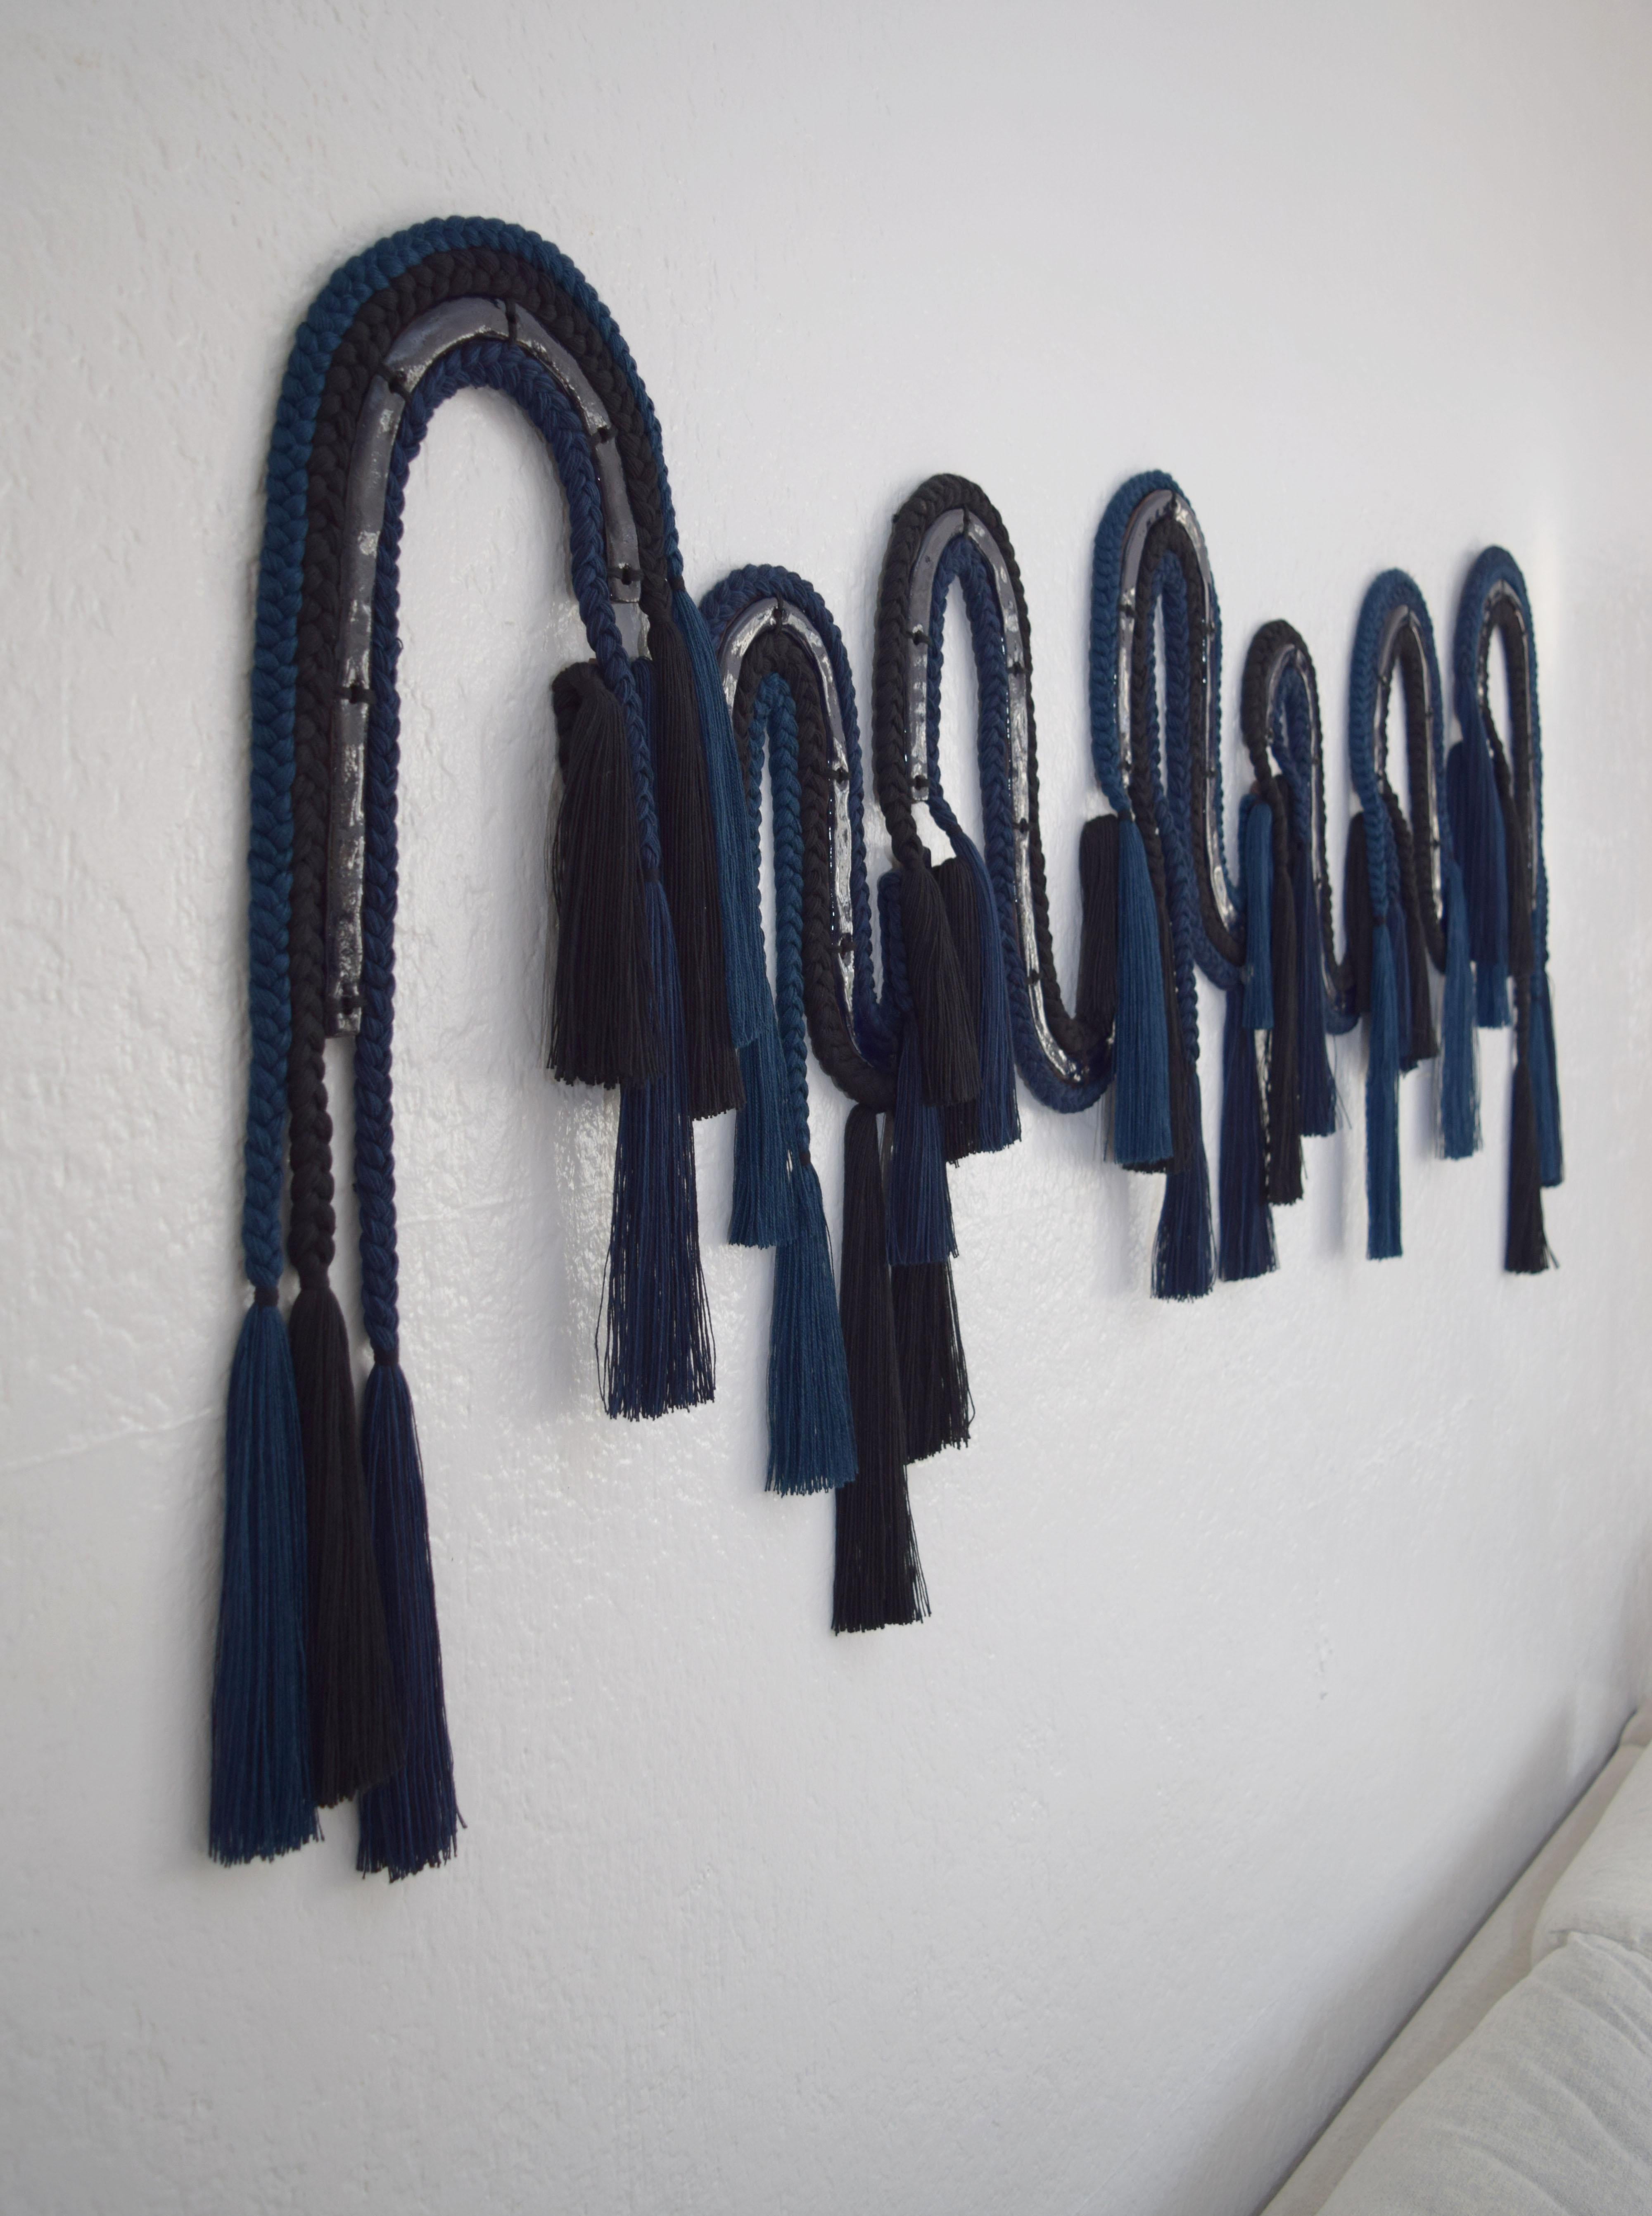 Wall sculpture #672 by Karen Gayle Tinney

7-panel wall sculpture in mixed materials of ceramic and braided cotton/tencel fibers. A ceramic core, glazed in deep navy blue is surrounded by braids in different textures and weights; navy cotton, navy